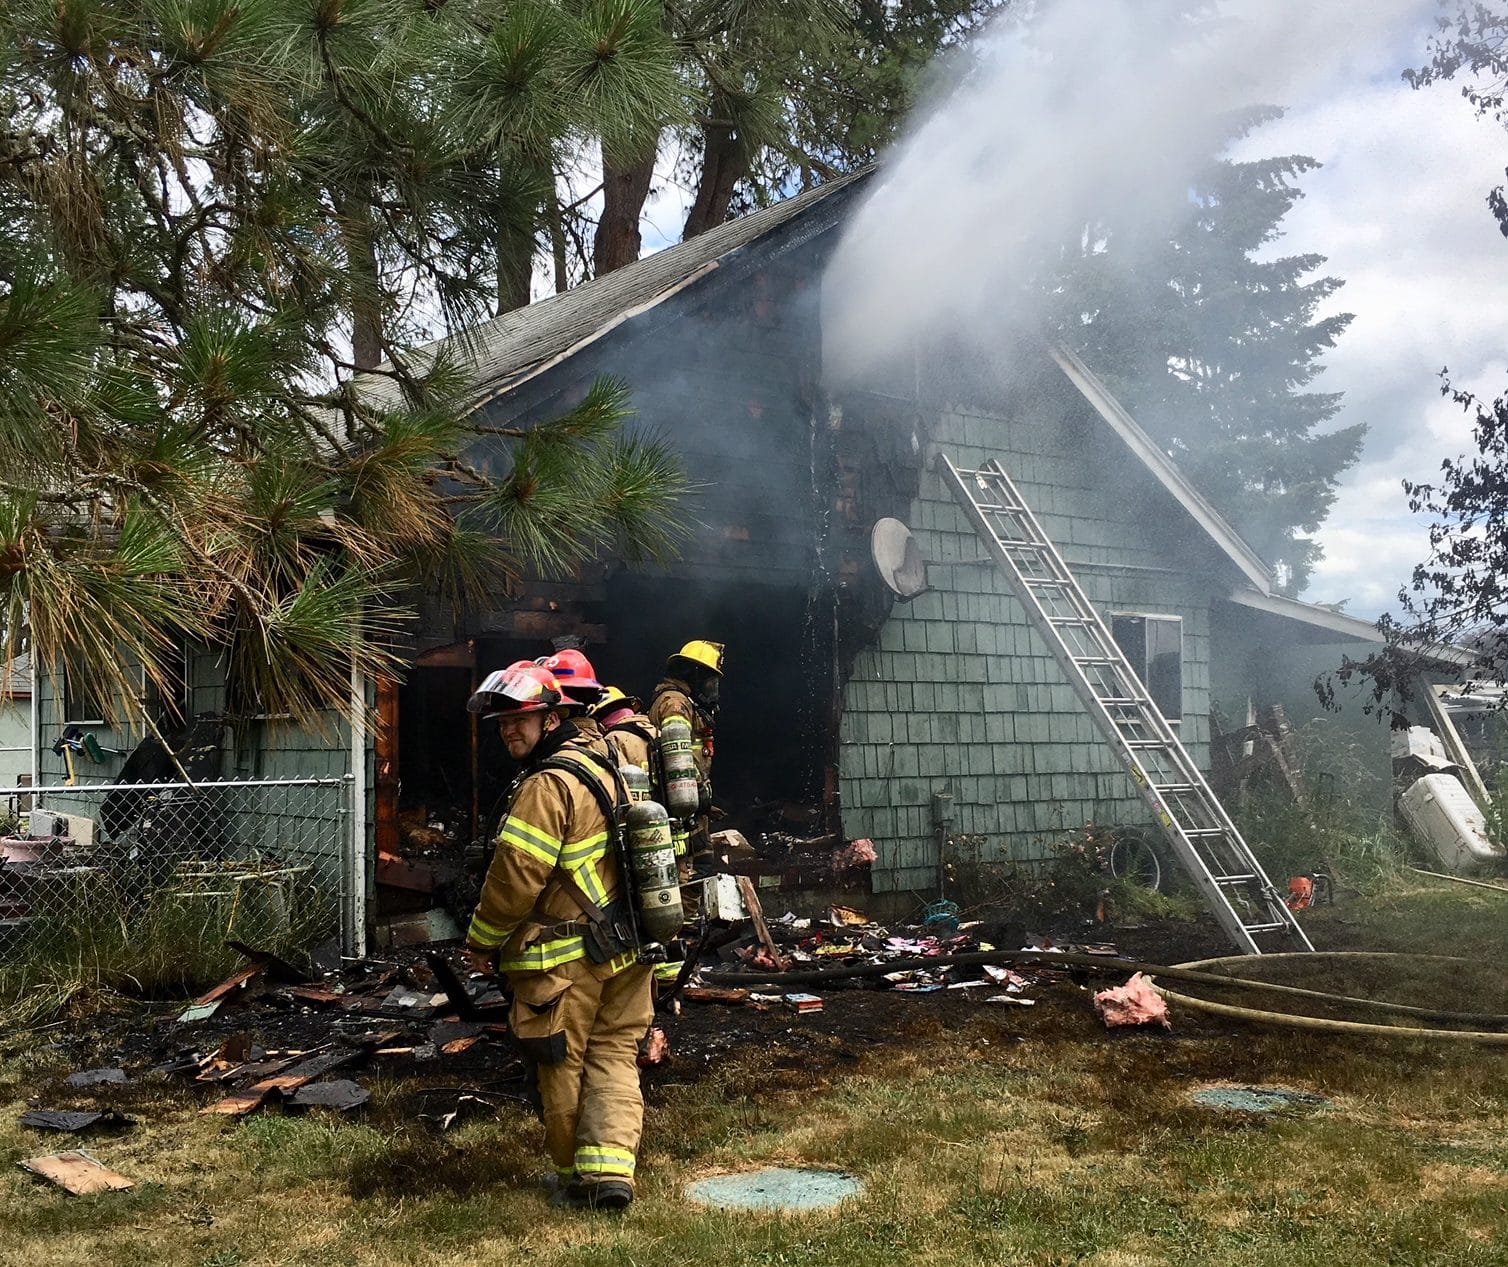 Firefighters work on a house fire near Battle Ground Monday.